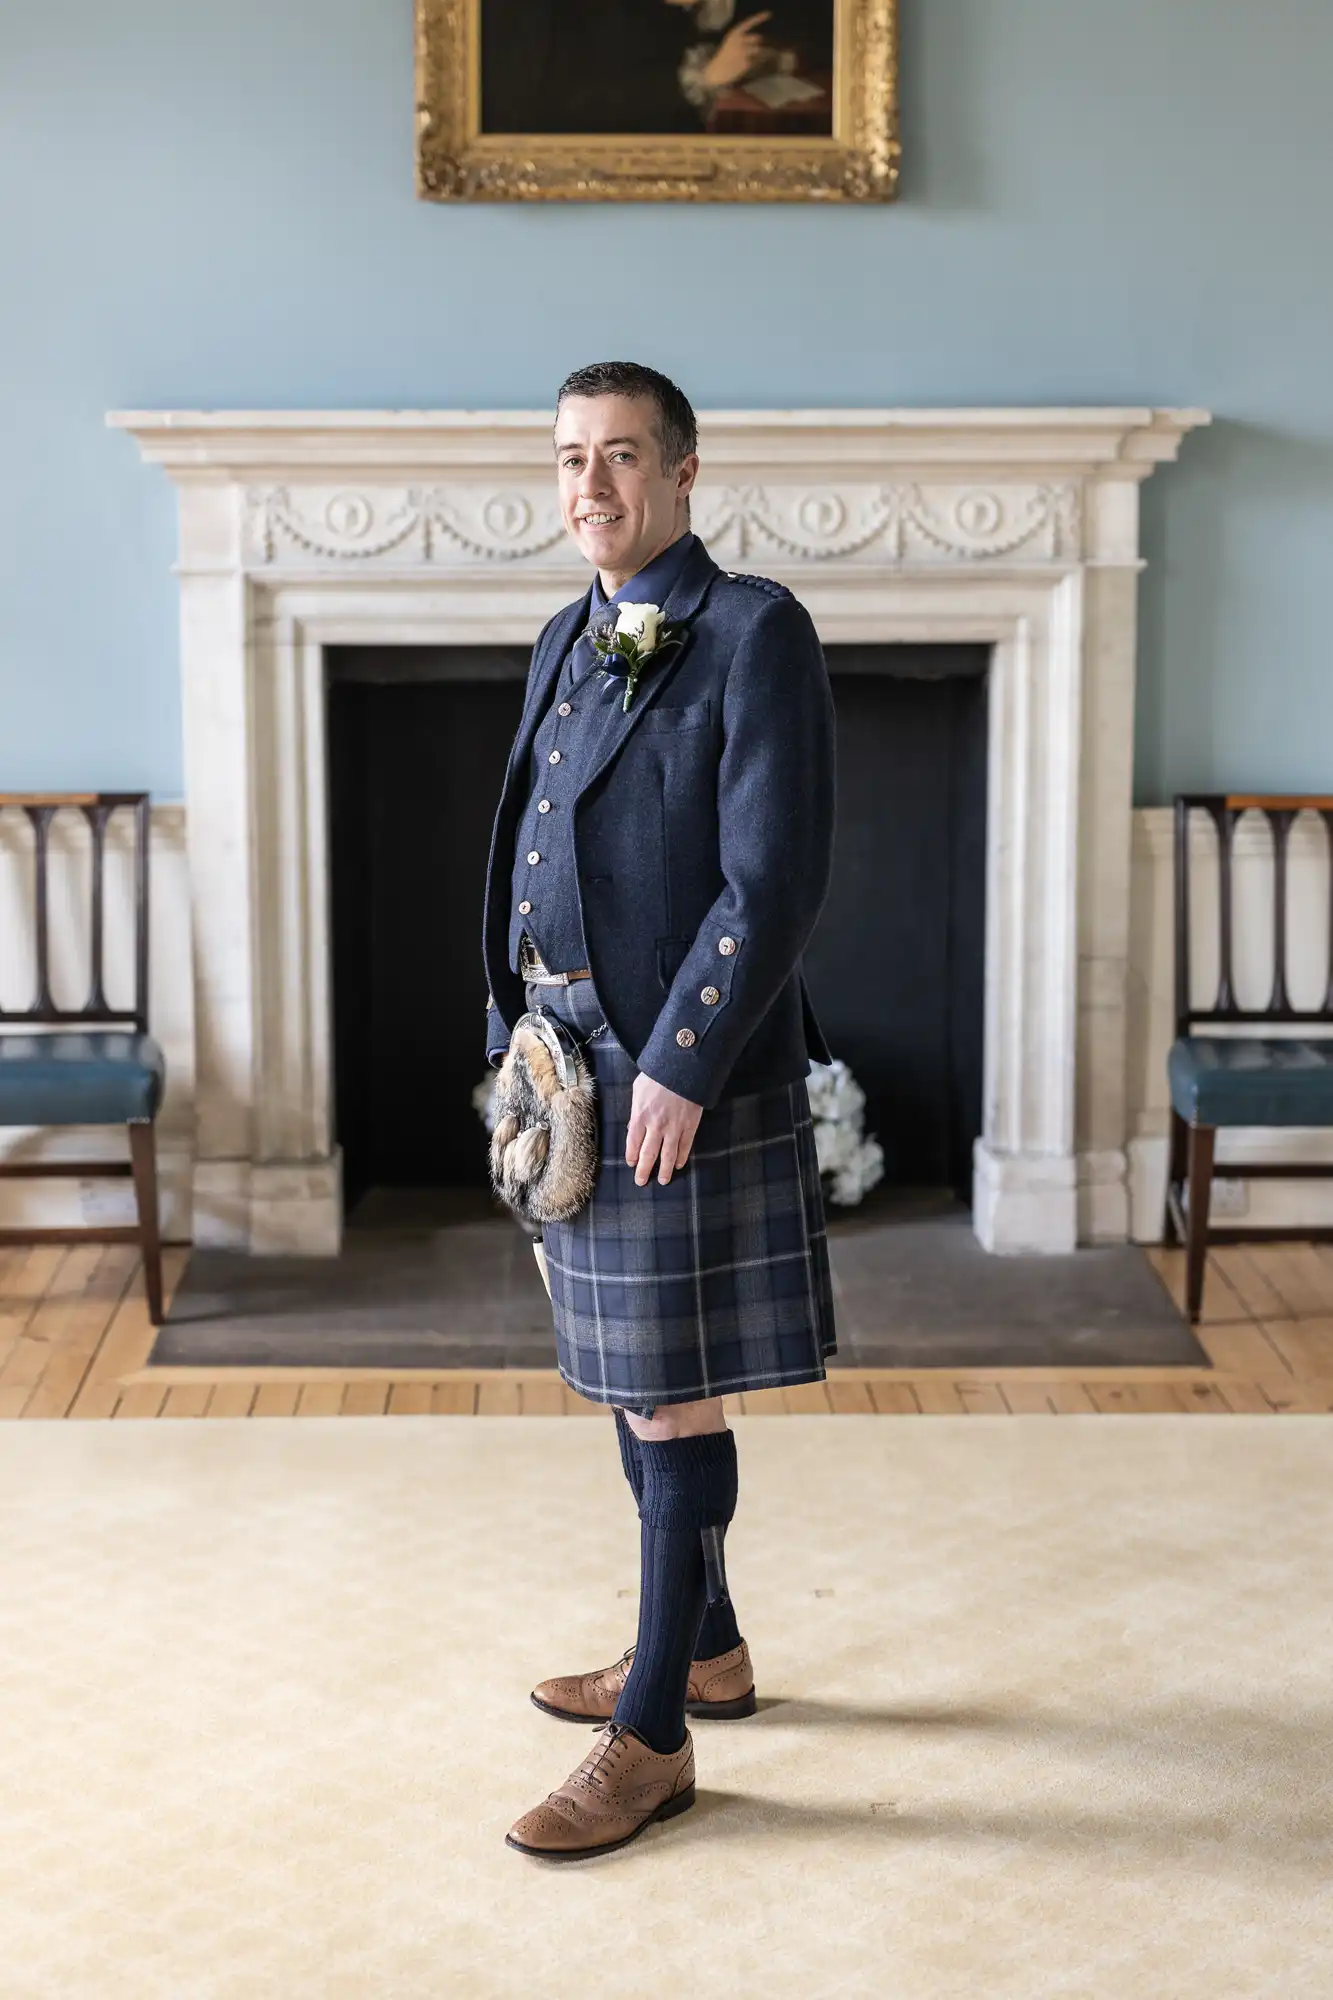 A man stands indoors wearing a traditional Scottish kilt outfit in front of a white fireplace, posing for the camera.